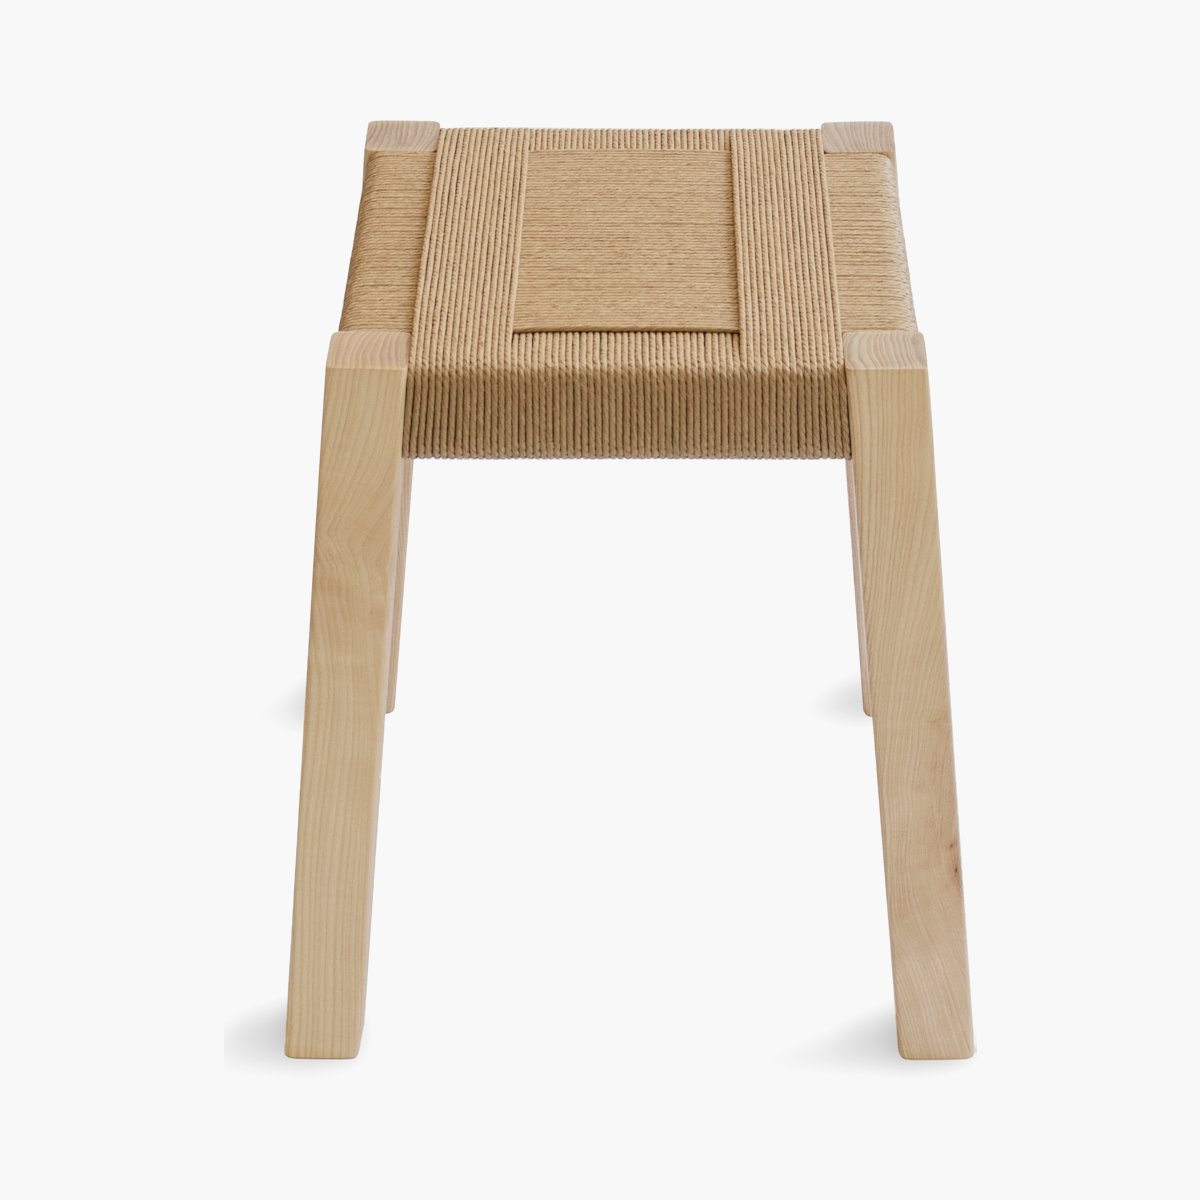 The Weaver's Stool, Table Height